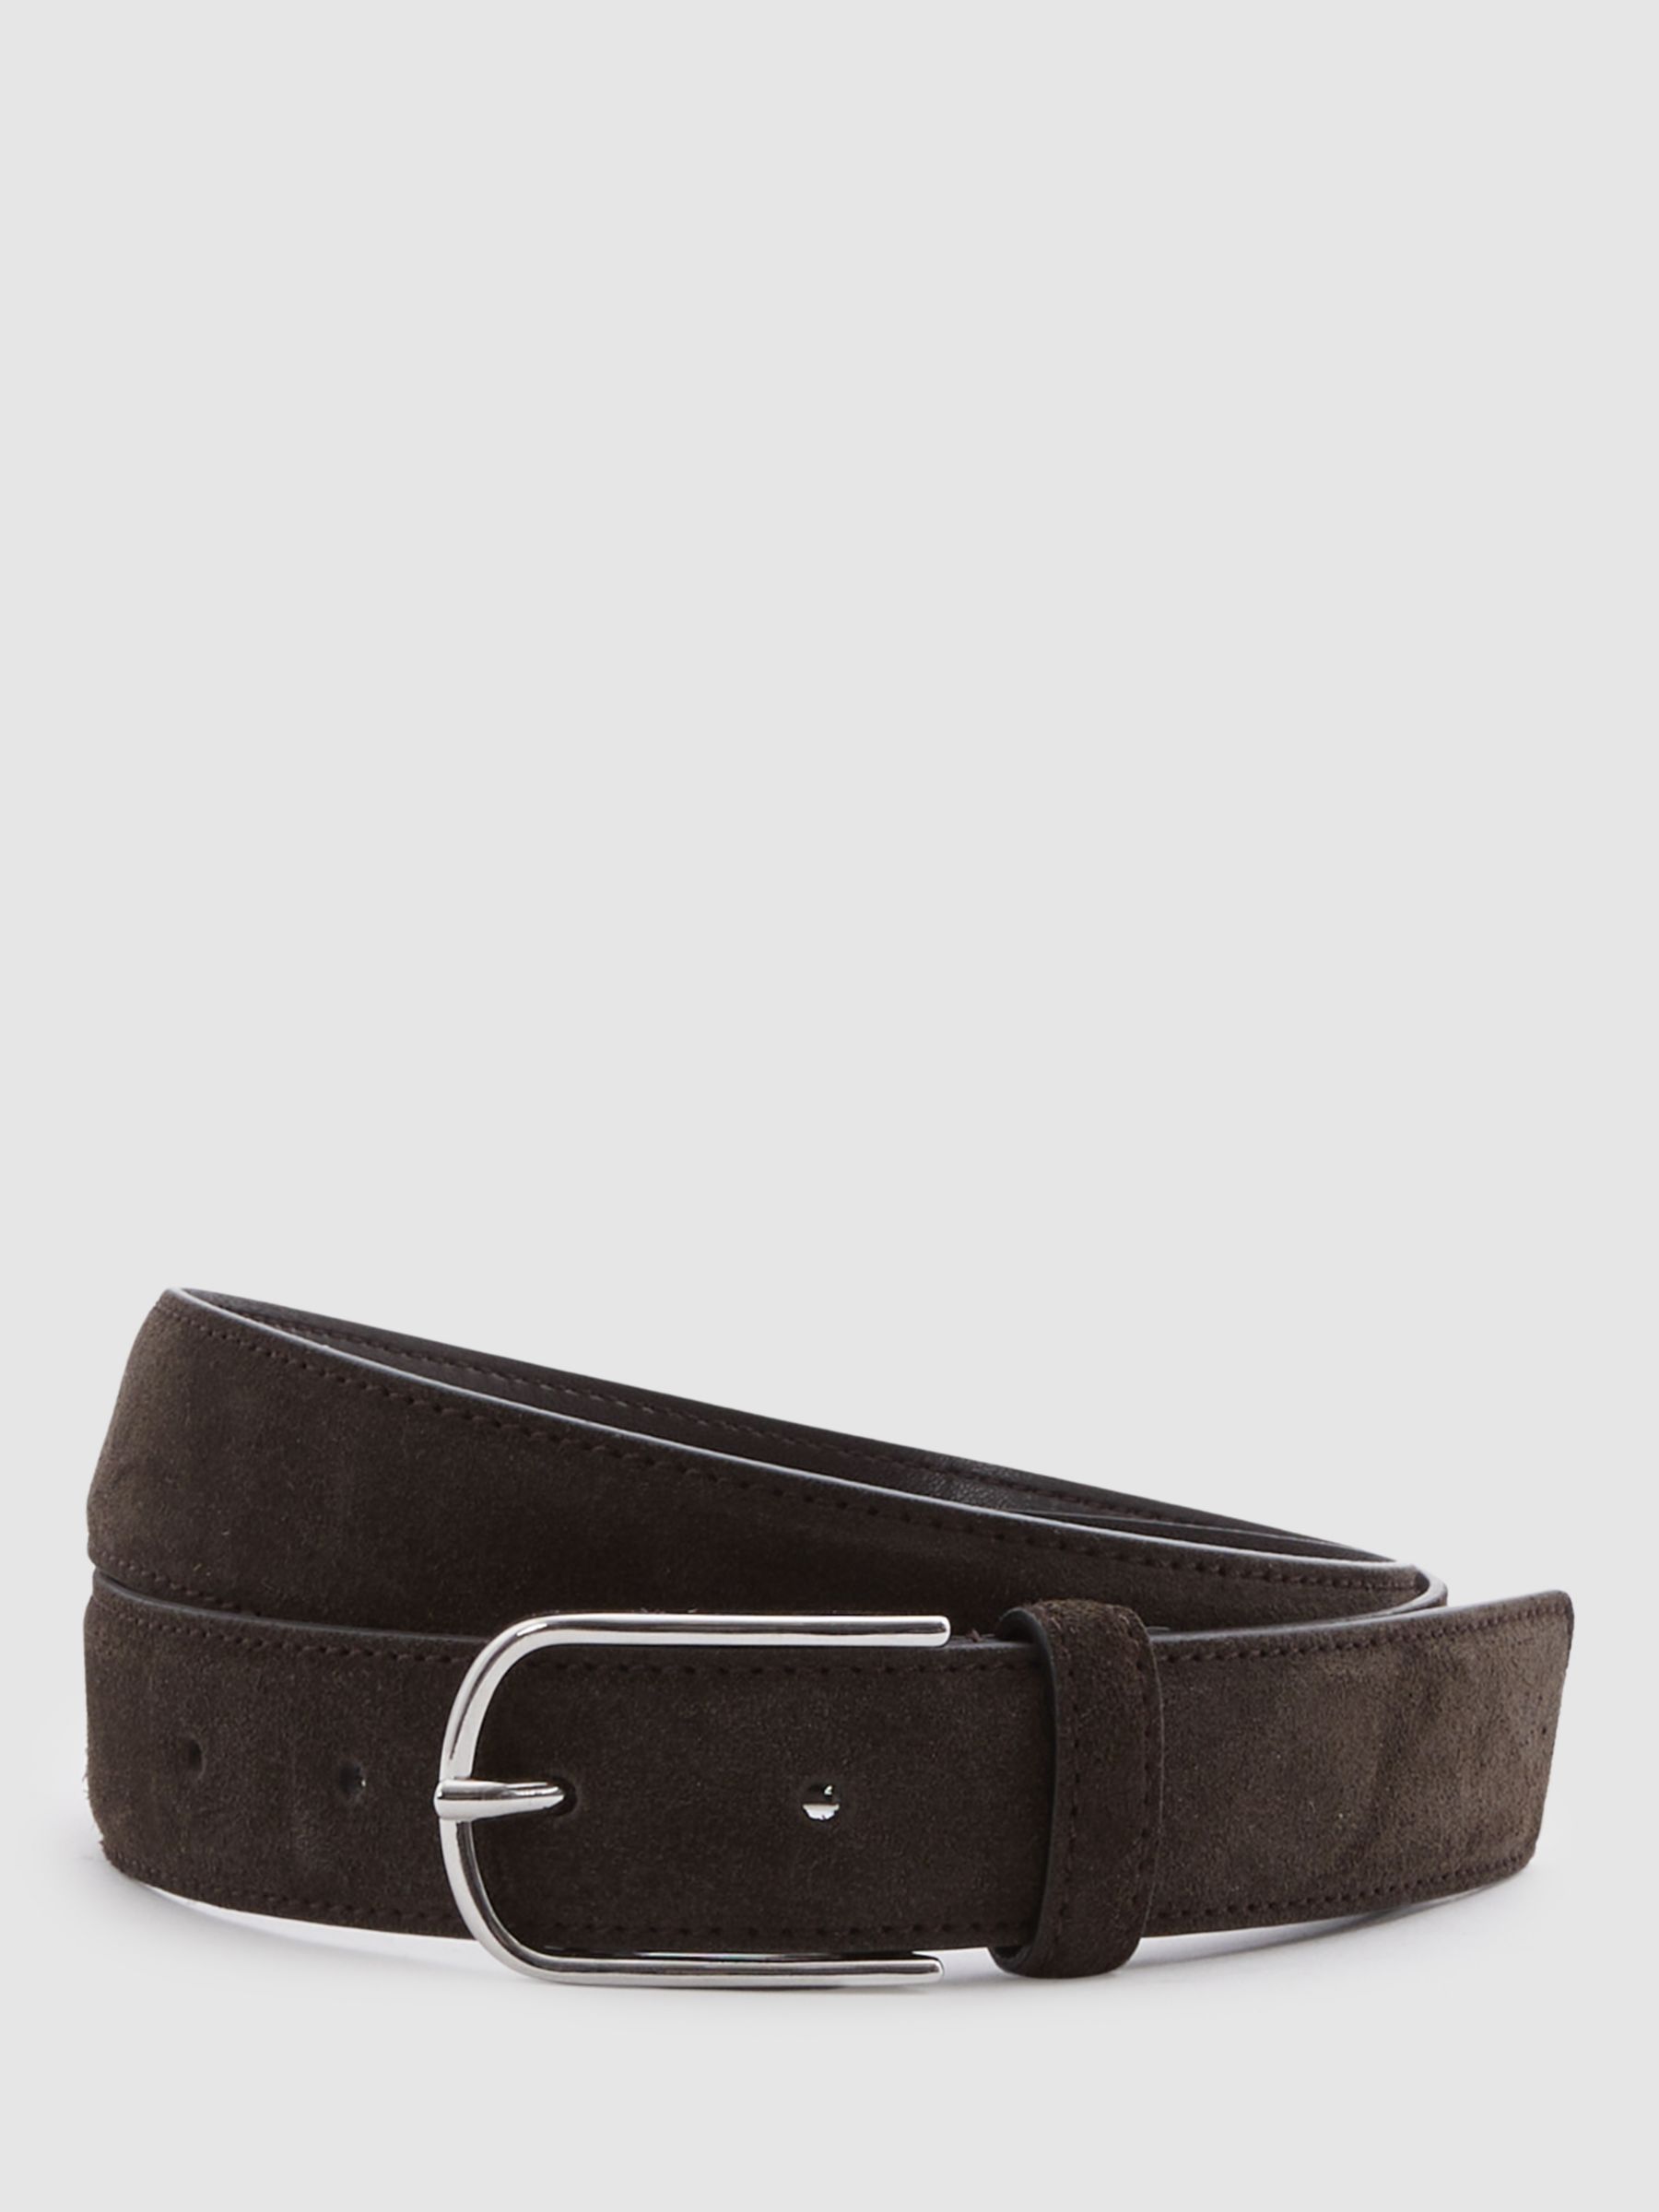 Reiss Carrie Suede Jeans Belt, Chocolate, S